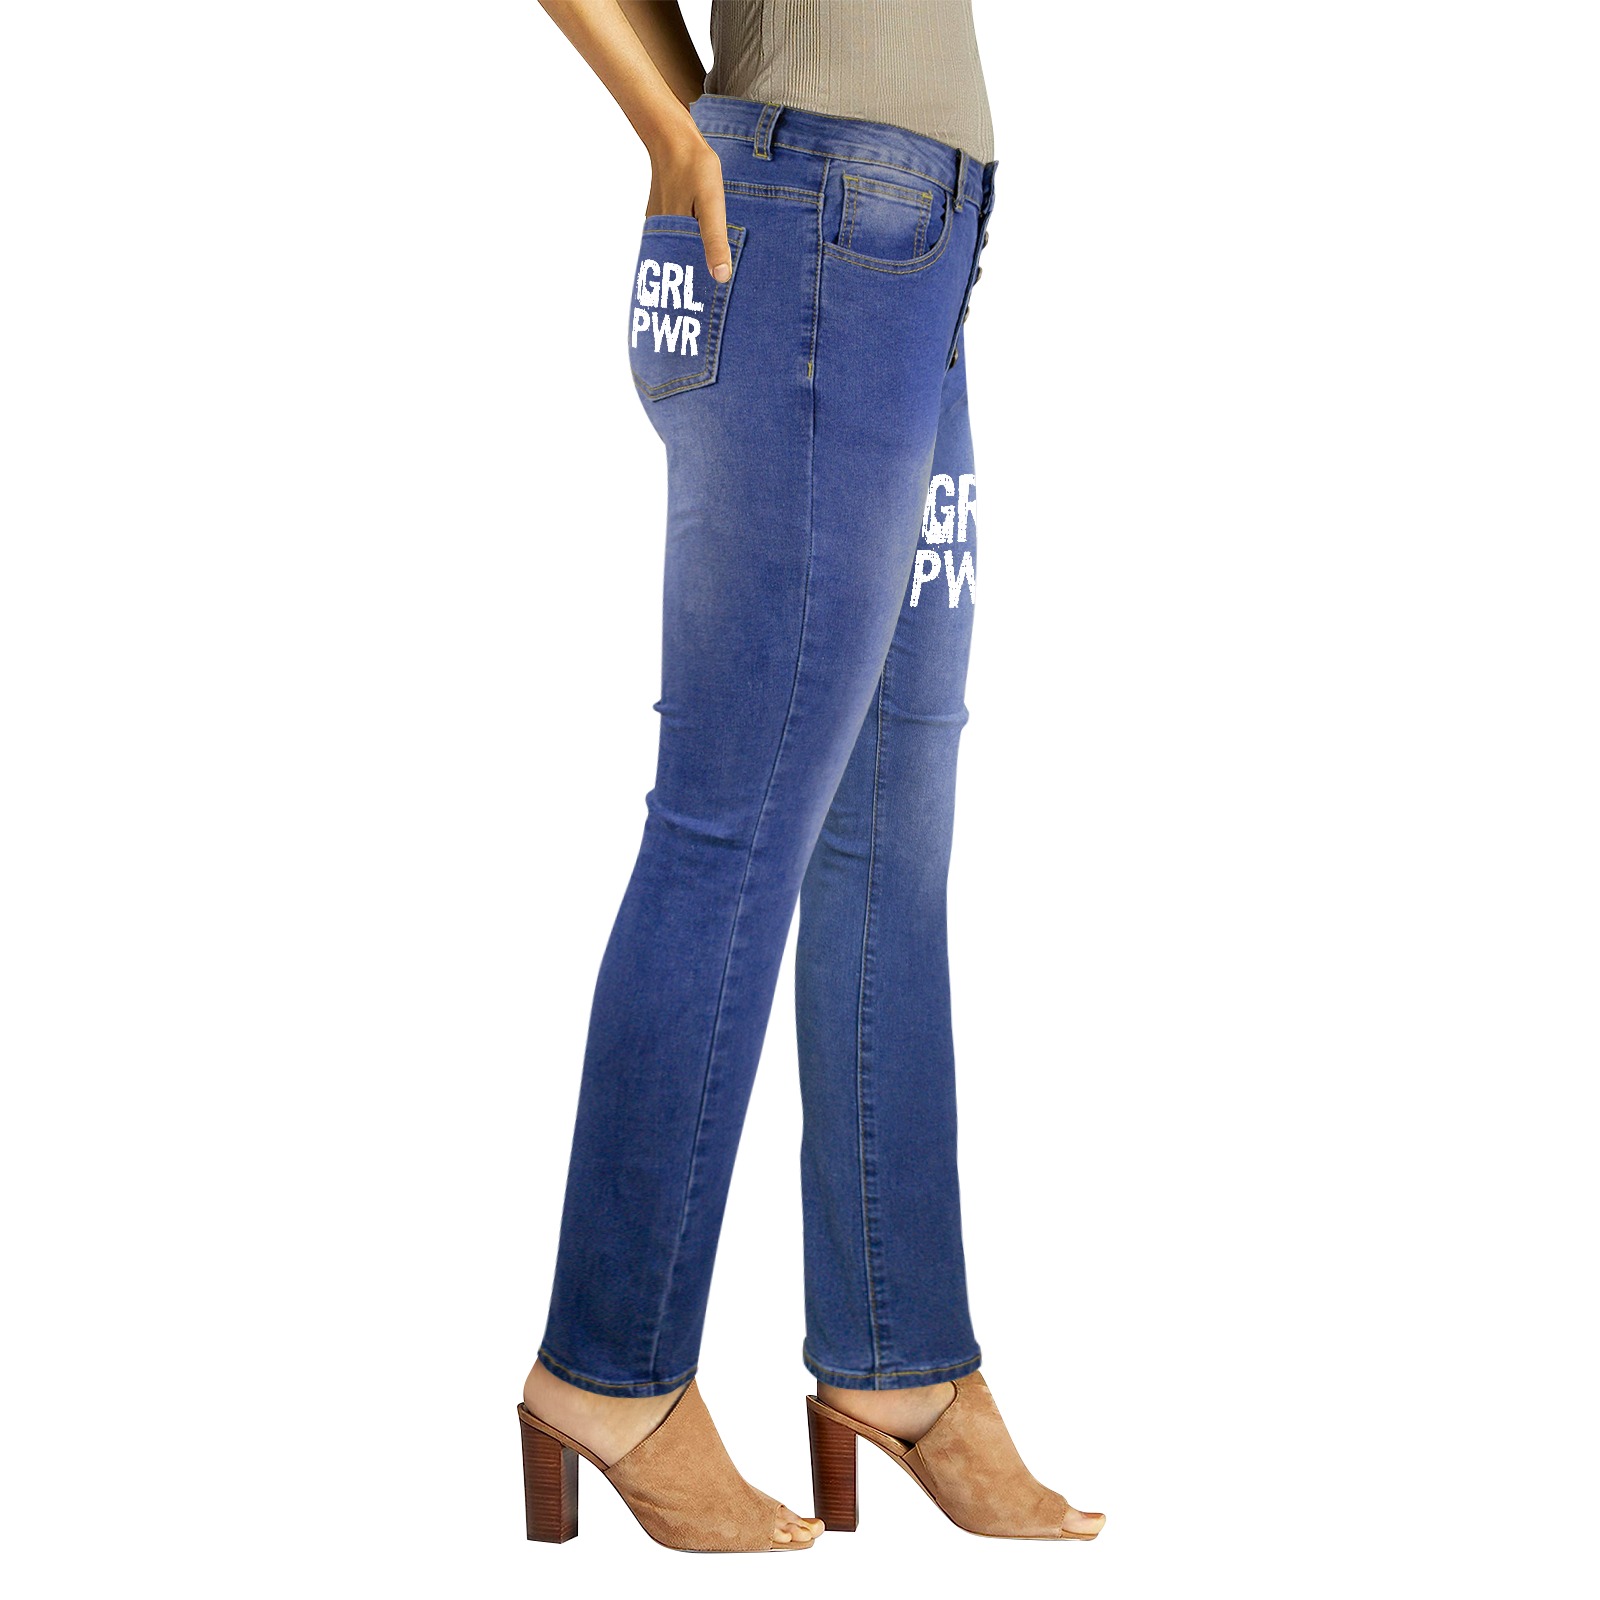 GRL PWR - Girl Power stunning white text. Women's Jeans (Front&Back Printing)